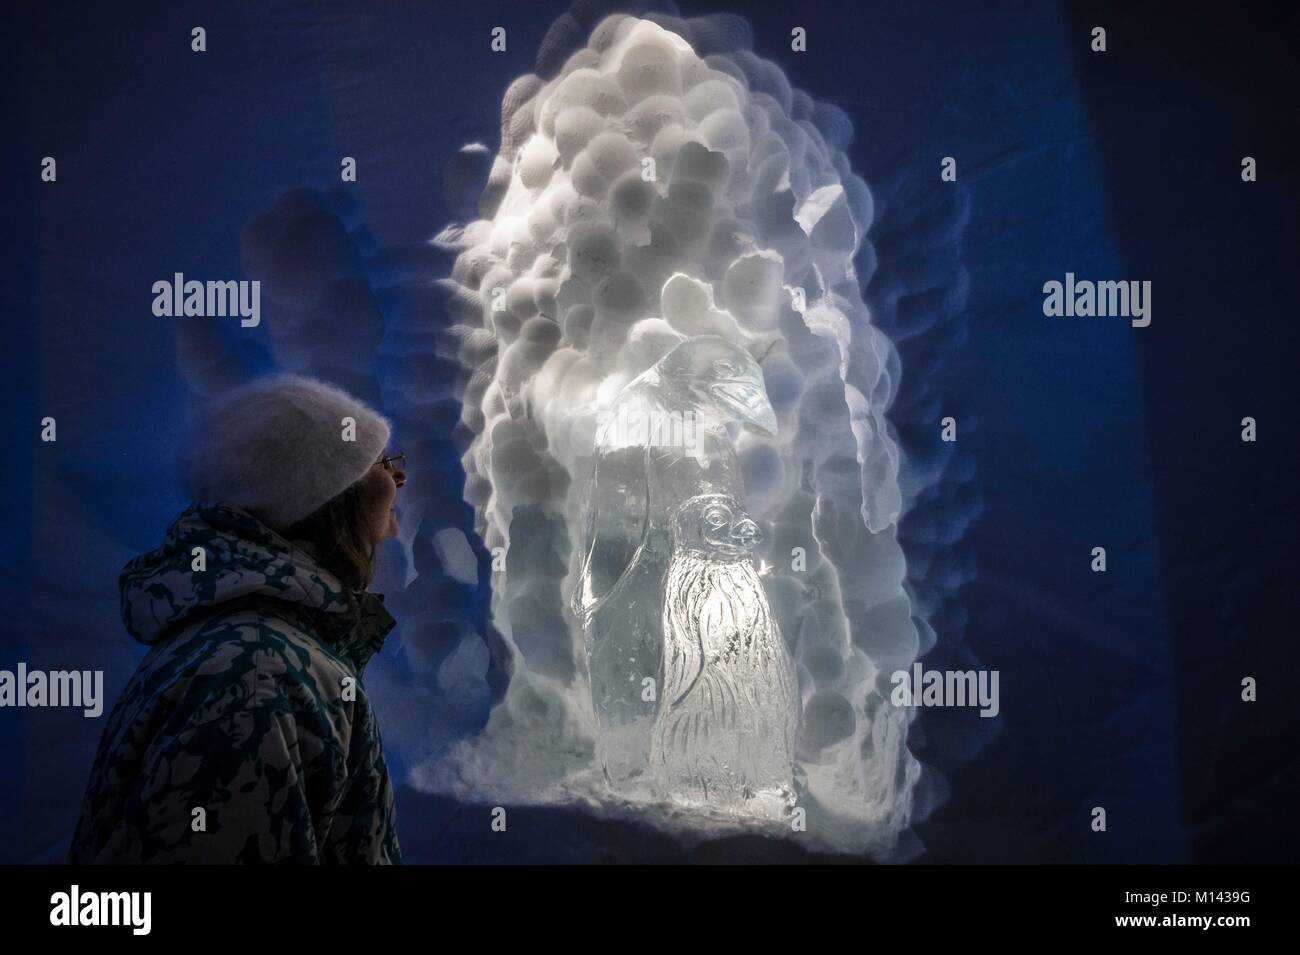 Vermont ice block igloo creation in pictures